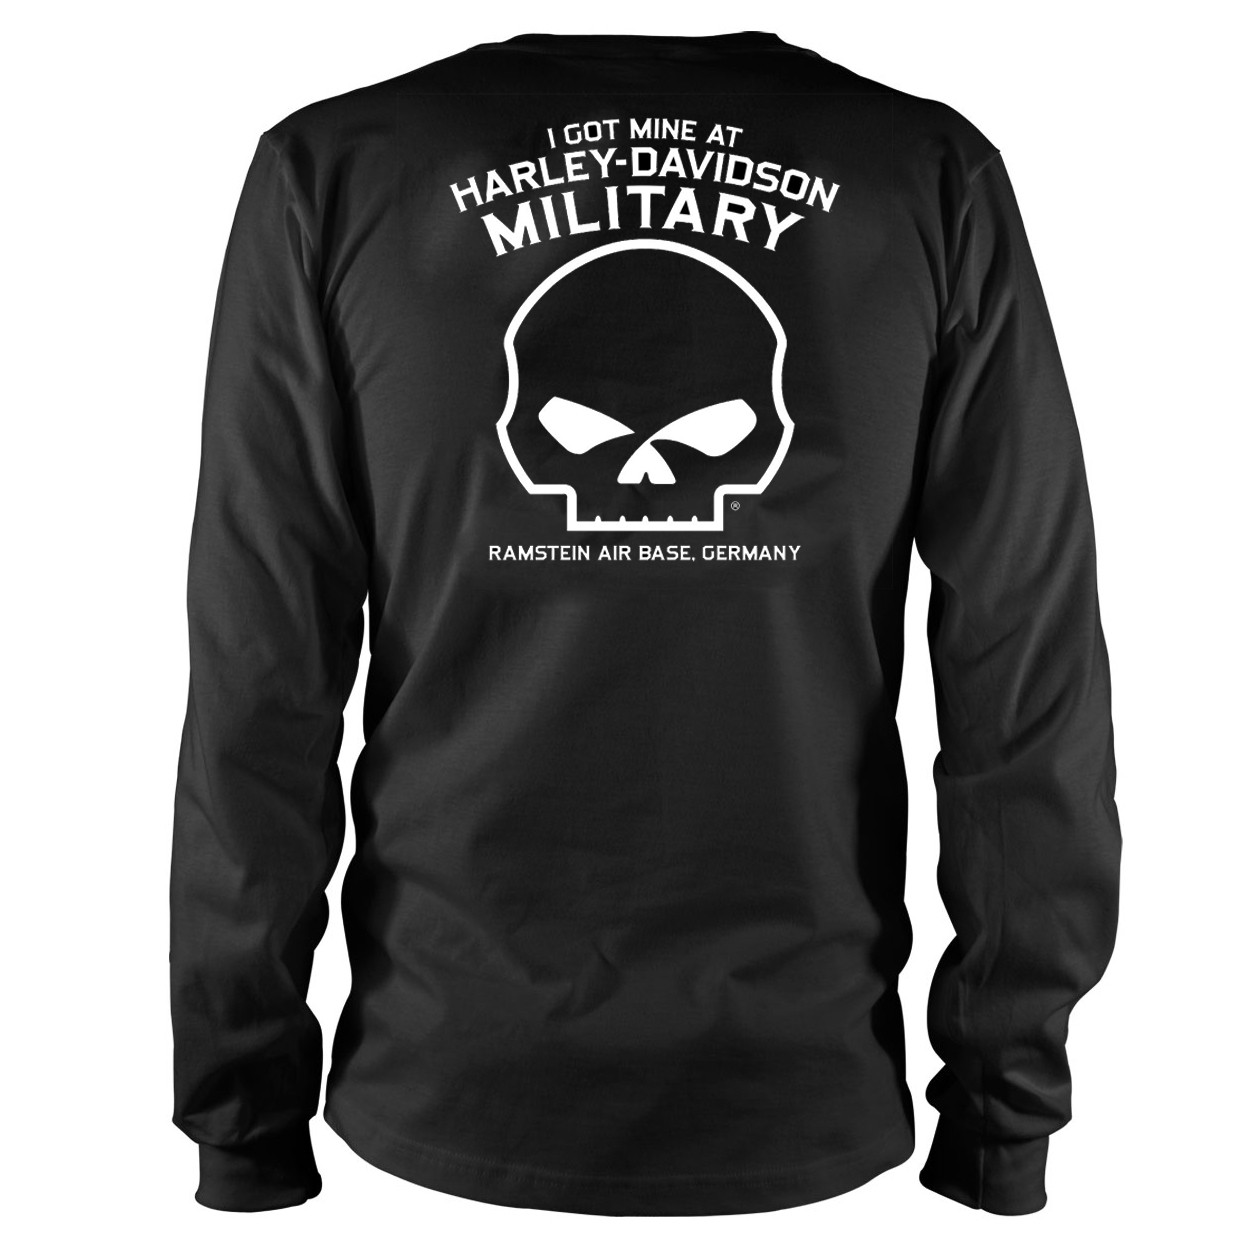 Download Harley-Davidson Military Long-Sleeve Crew Neck Graphic T ...